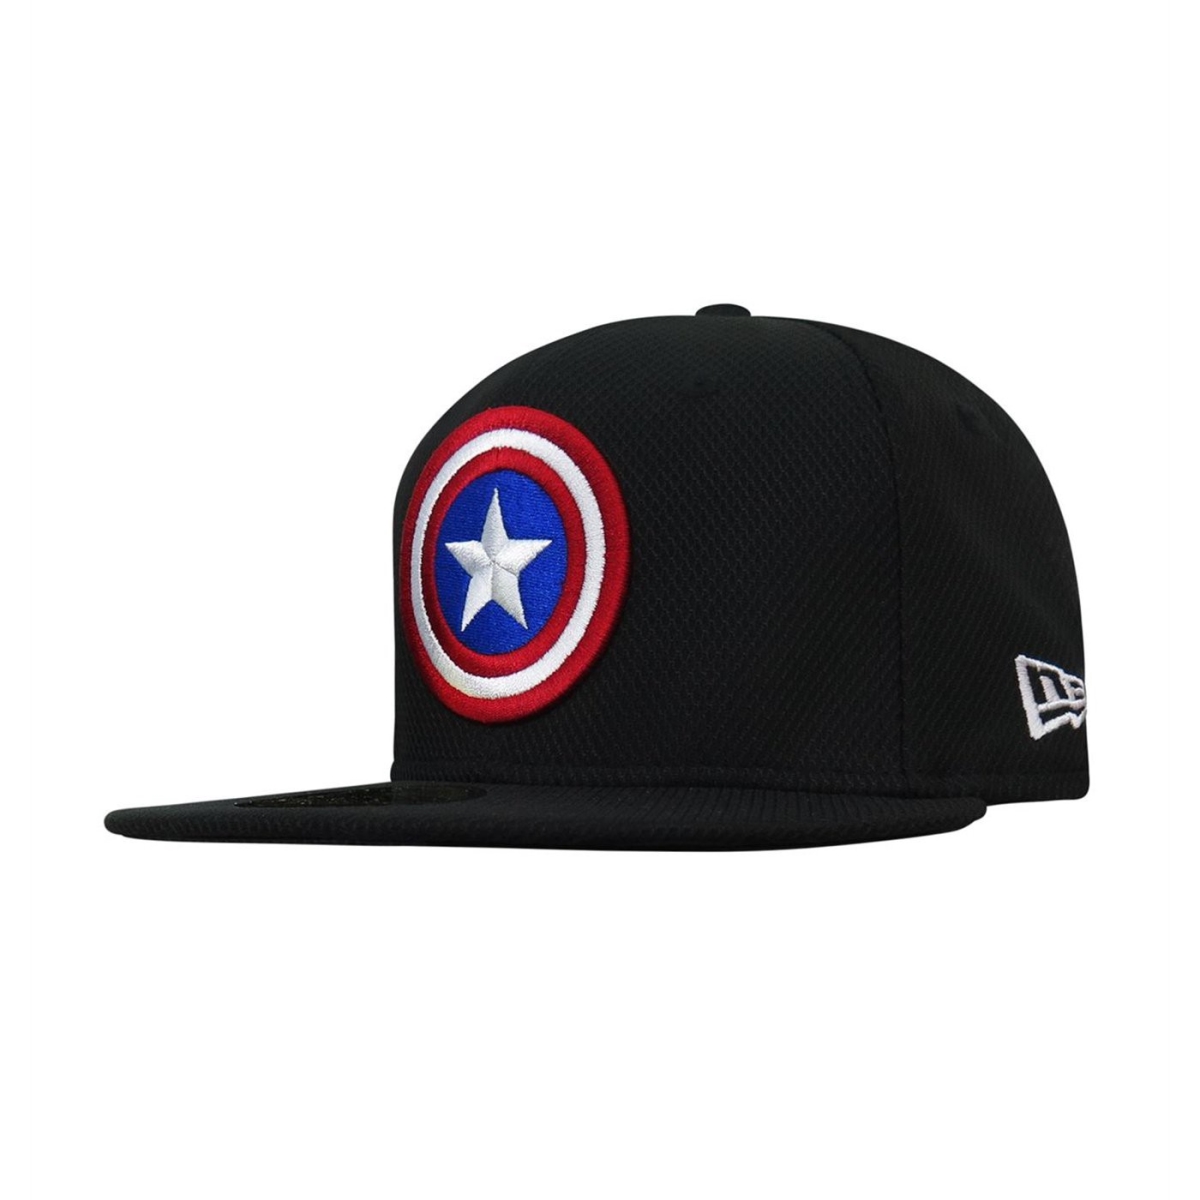 Picture of Captain America hatcapshldsym5950-778-7 7-8 Fitted Captain America Shield Black 59Fifty Fitted Hat - Size 7.875